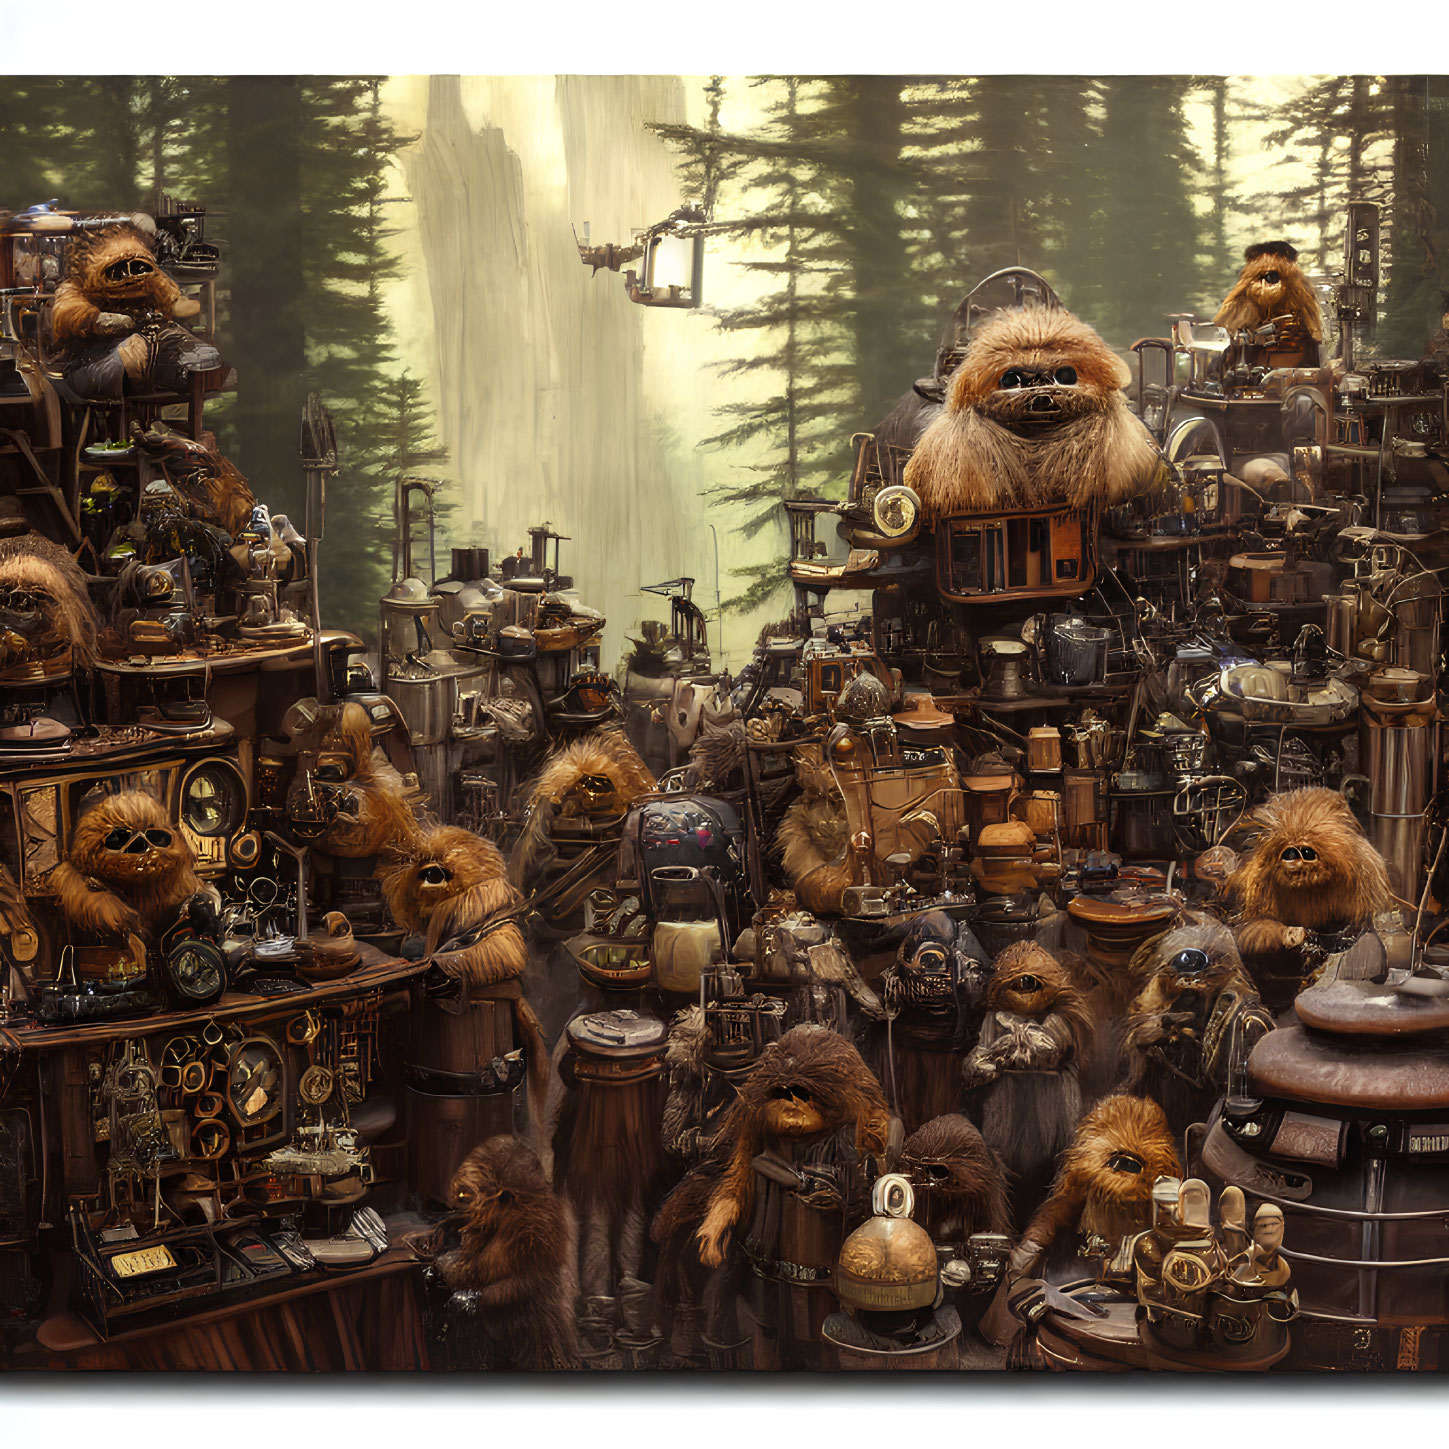 Detailed Workshop Scene with Wookiees and Machines